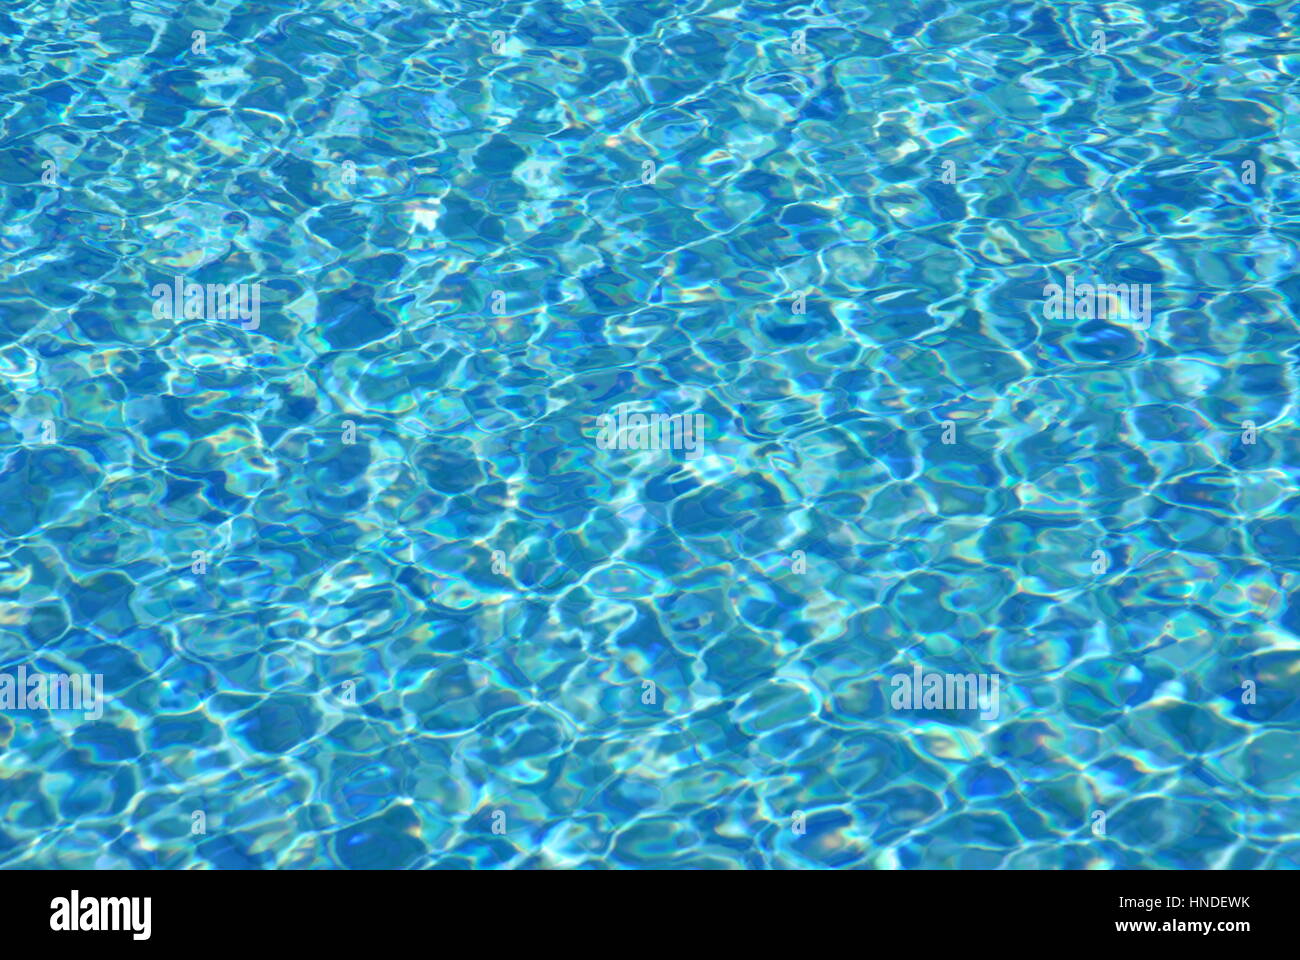 Light refractions in swimming pool Stock Photo